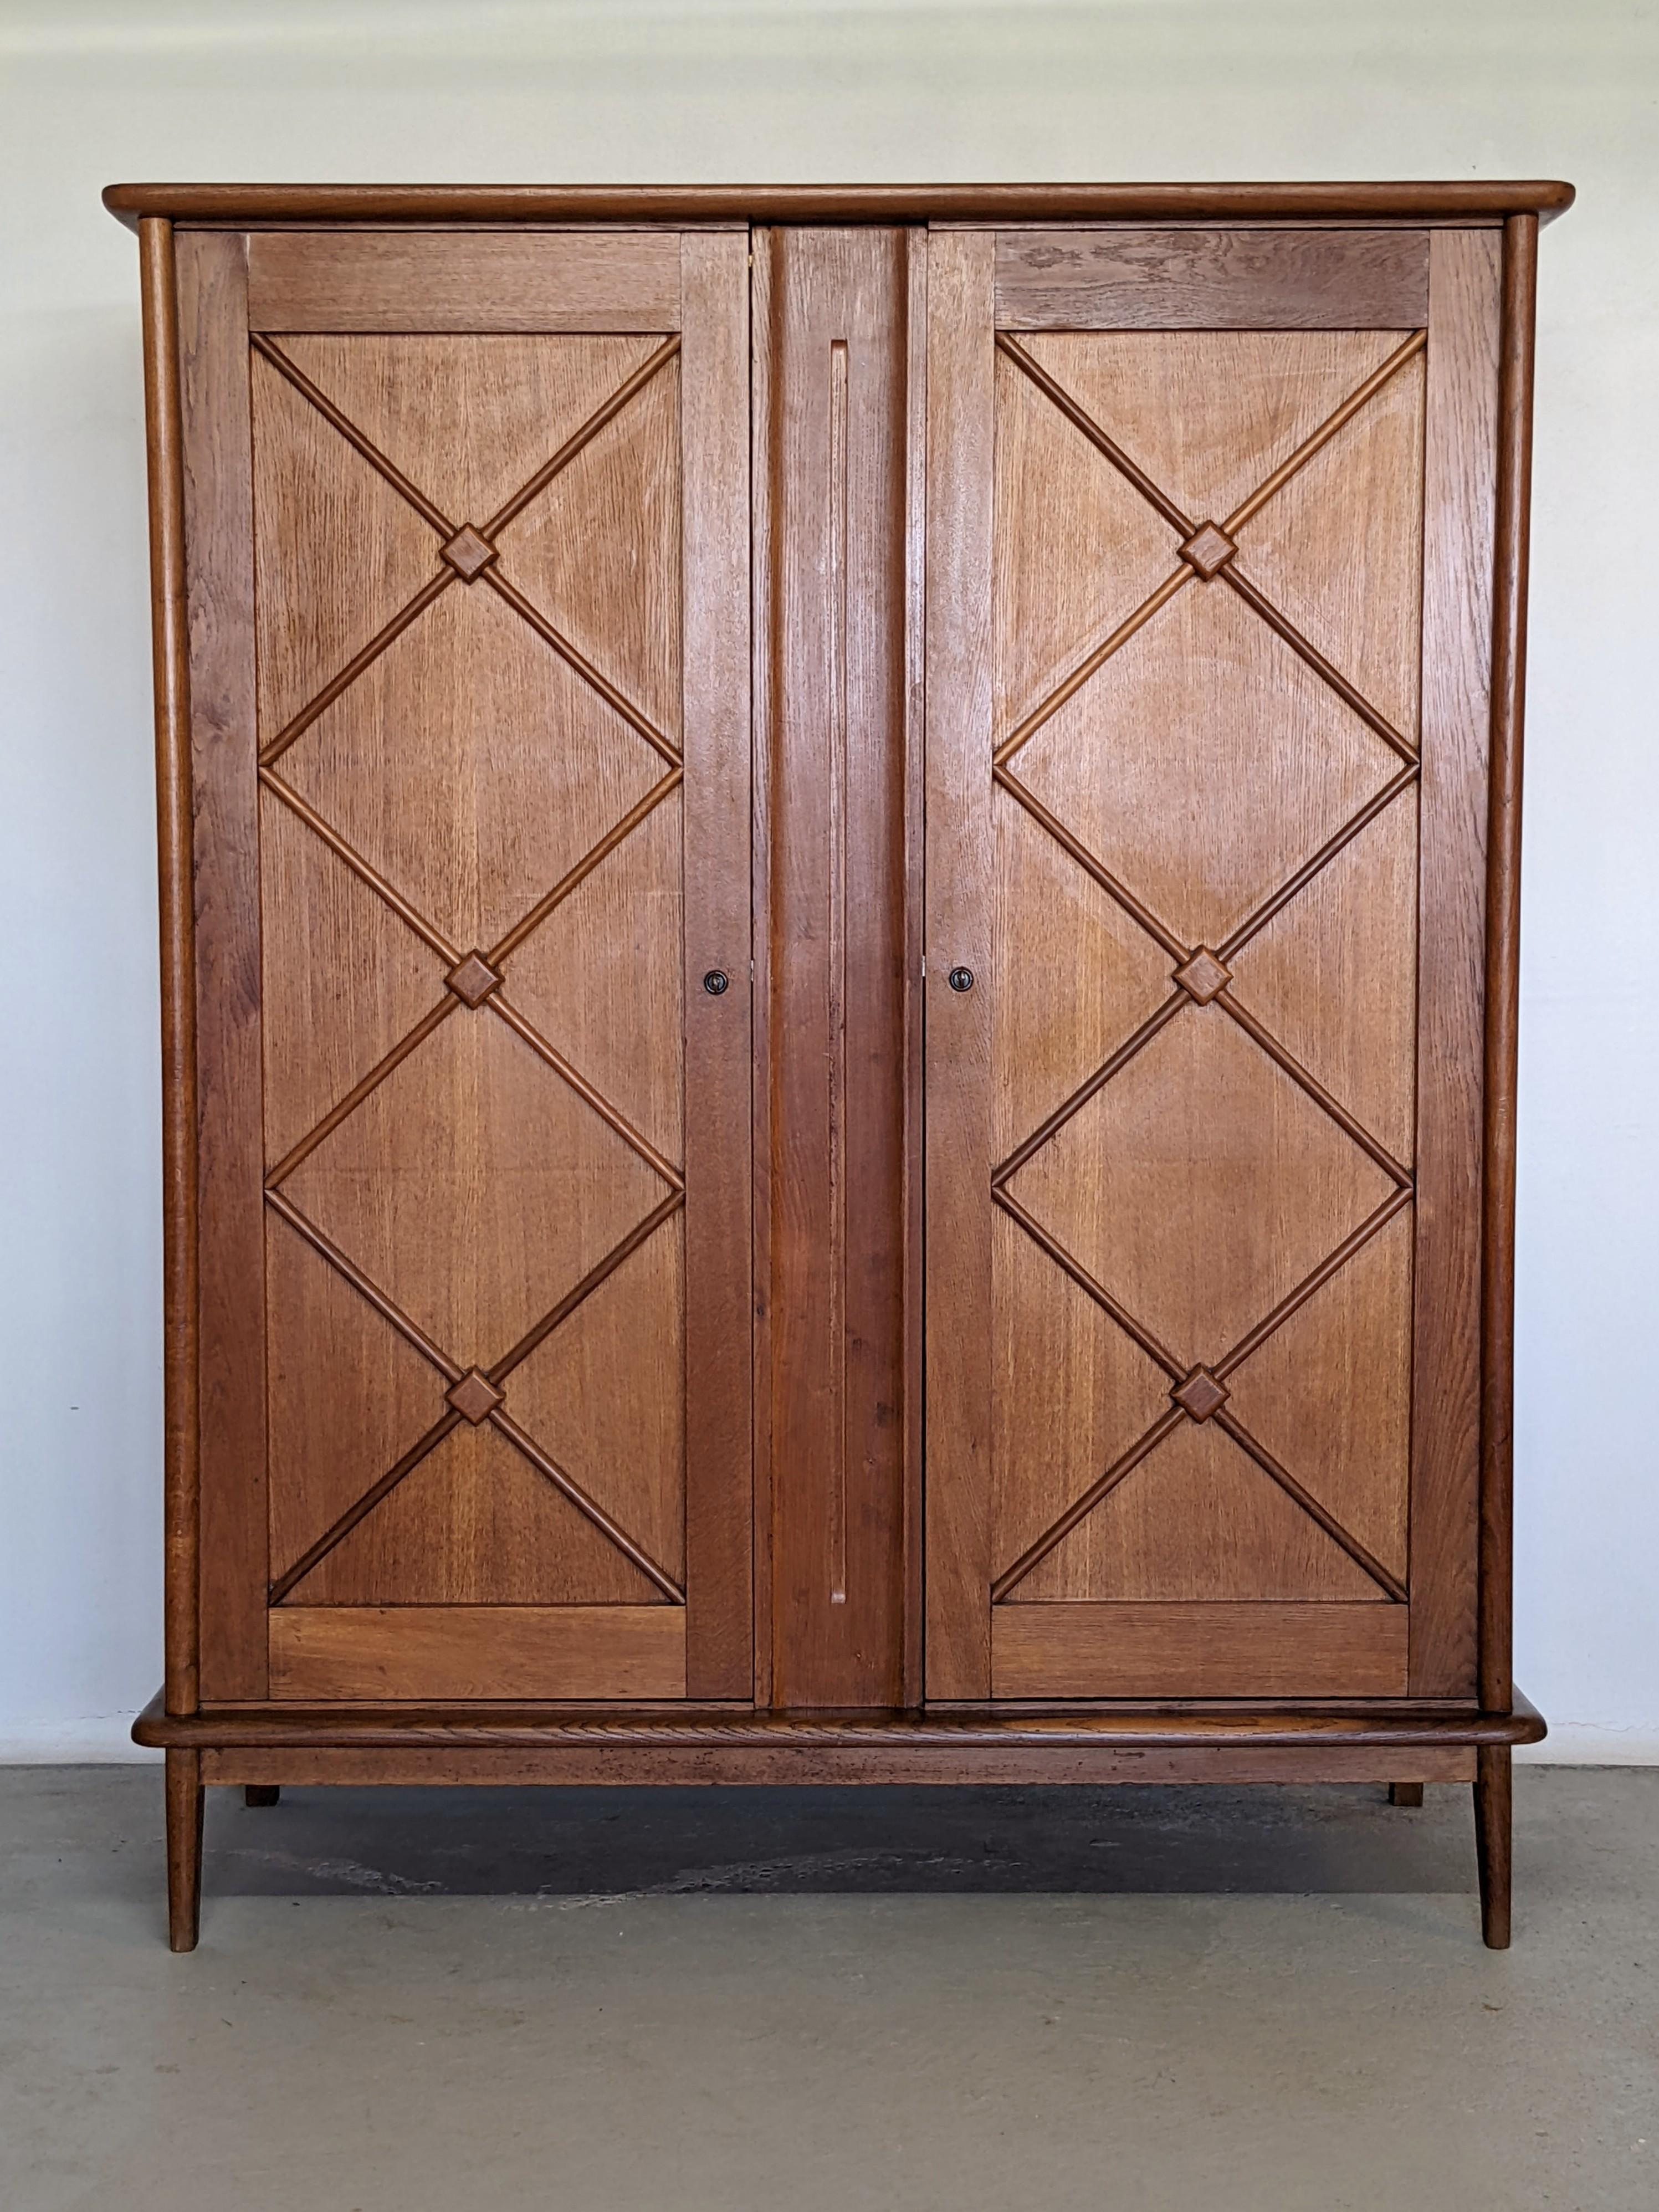 Elegant wardrobe in solid oak and oak veneer.
Made in France in the 1960s.

Geometric patterns on each doors.
3 Drawers adjustable in height on the left and a cloth rack on the right.
2 Keys included.

Beautiful wood grain.